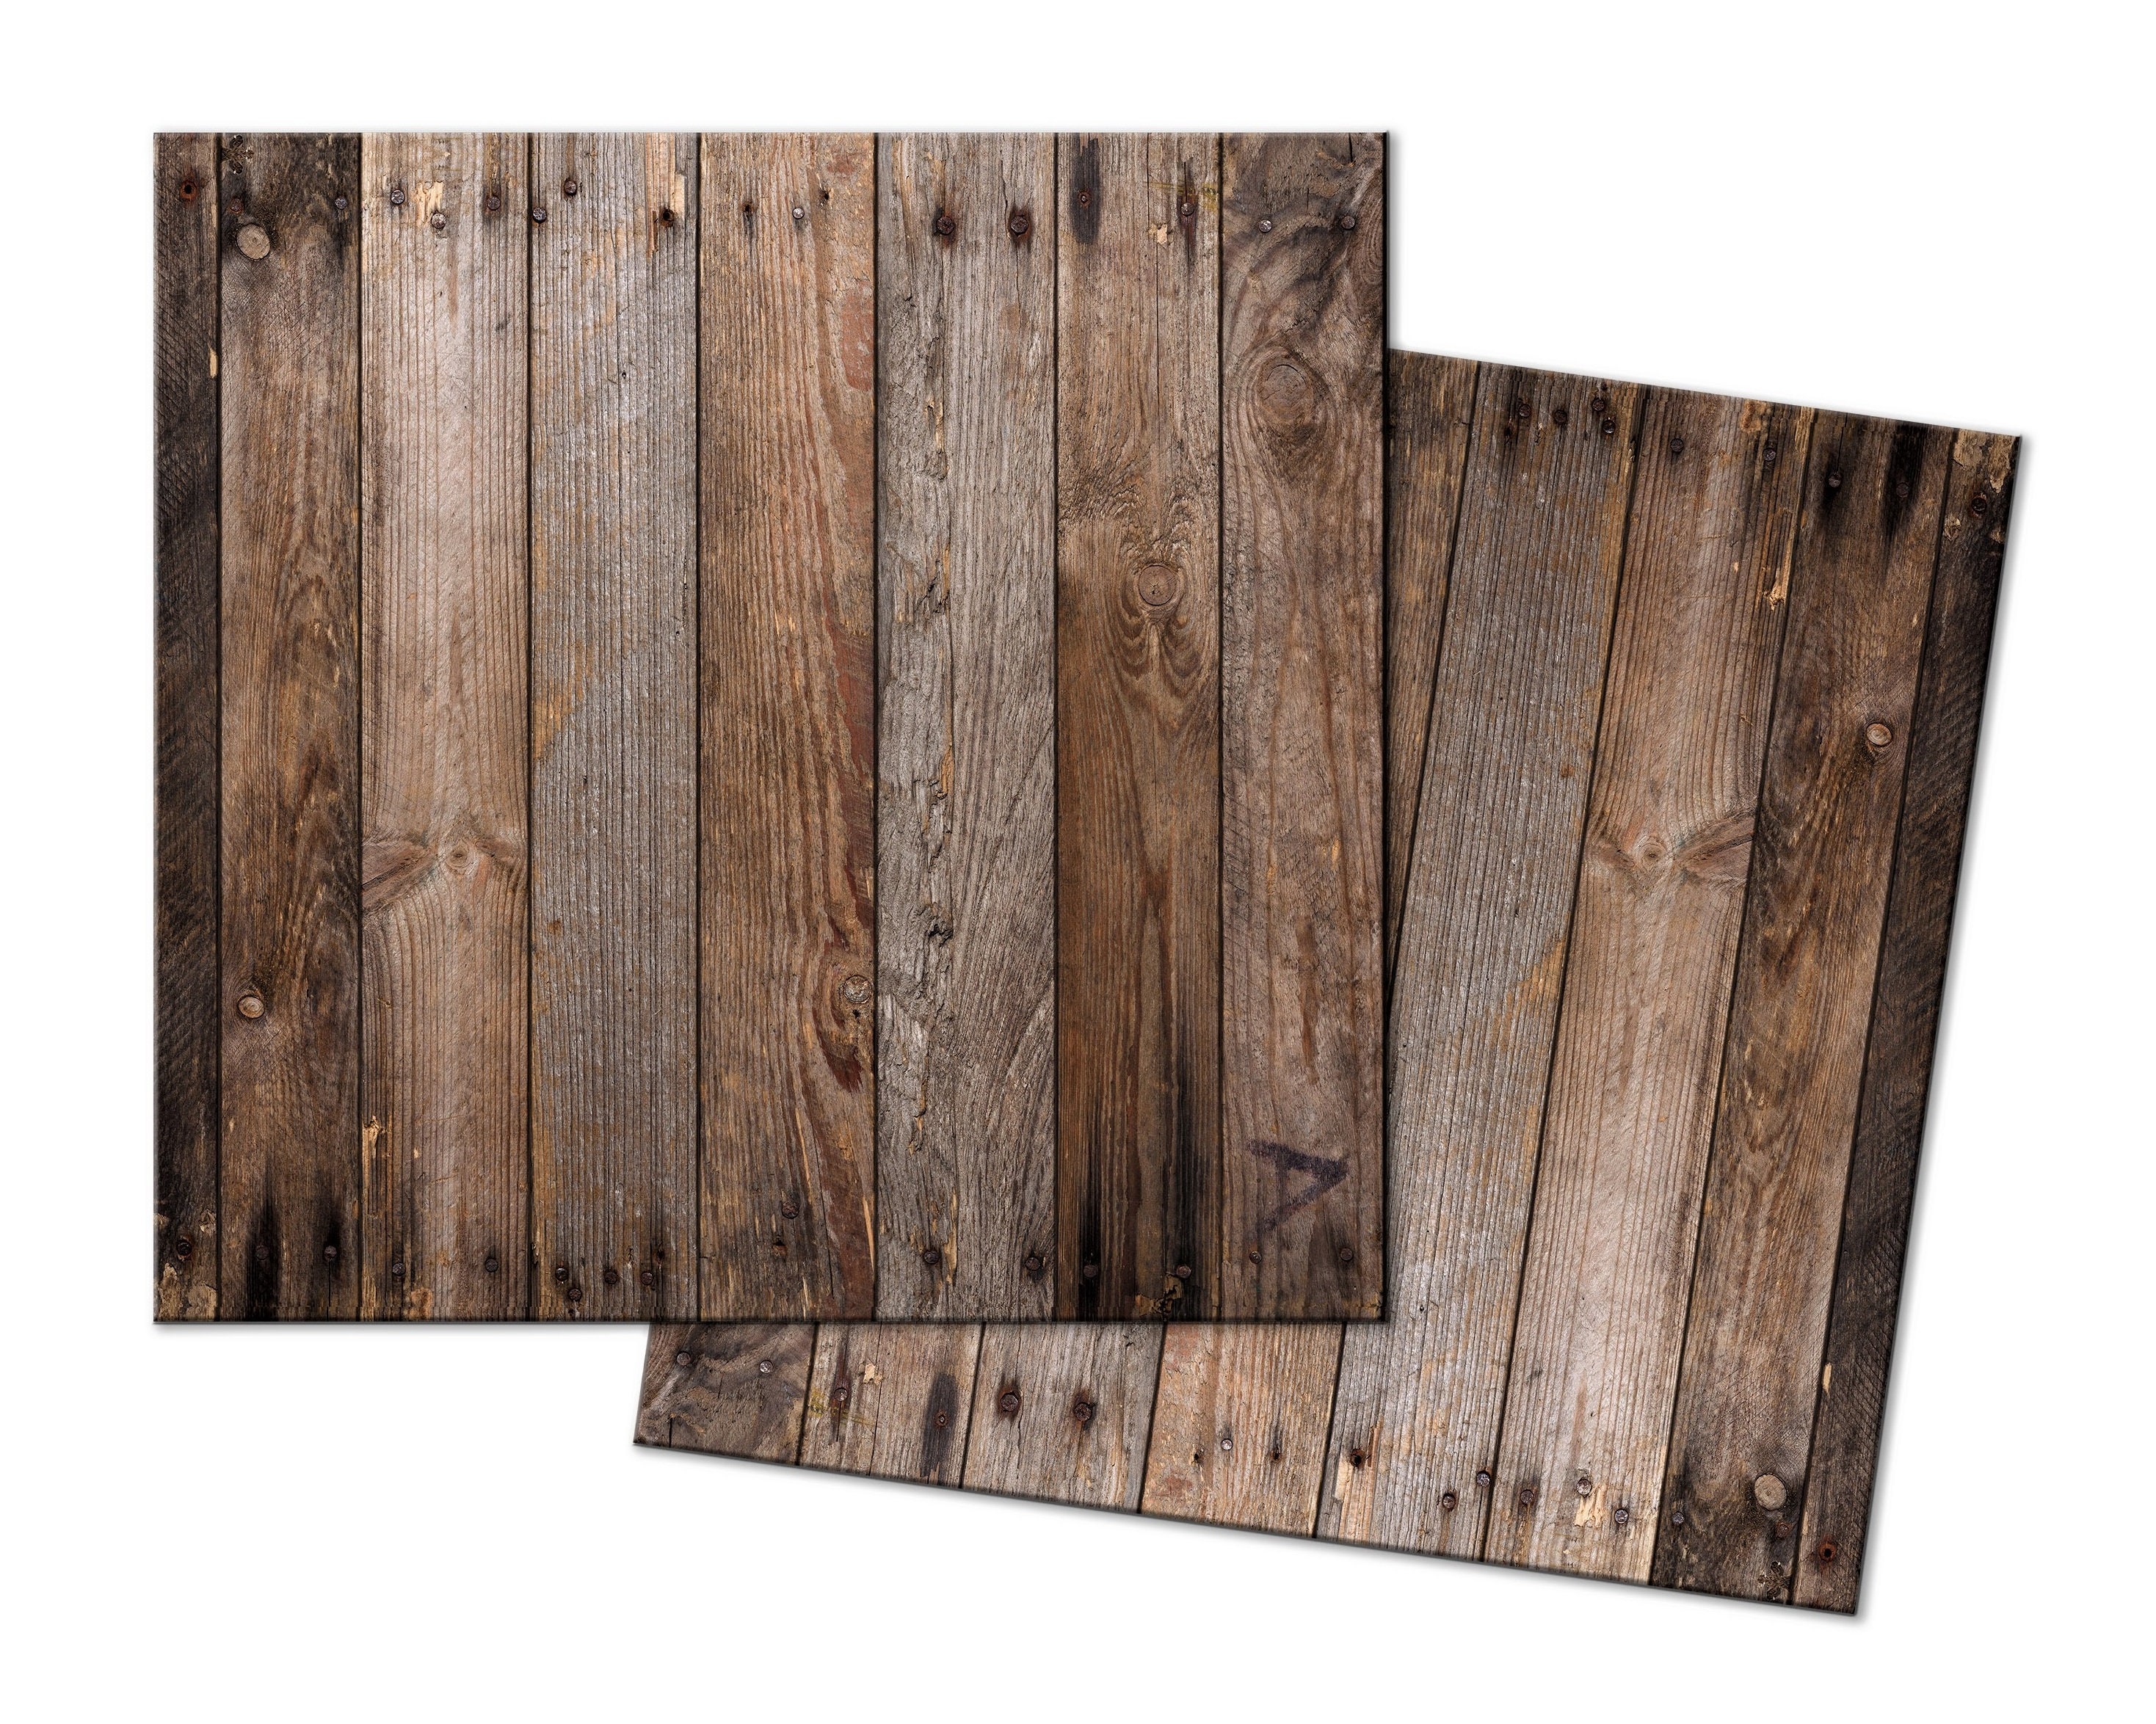 Faux Rustic Barn Wood Placemats for Round Table Tactile Basket Texture  Turned Hem Edges , Waterproof Non Slip Wipe Clean 